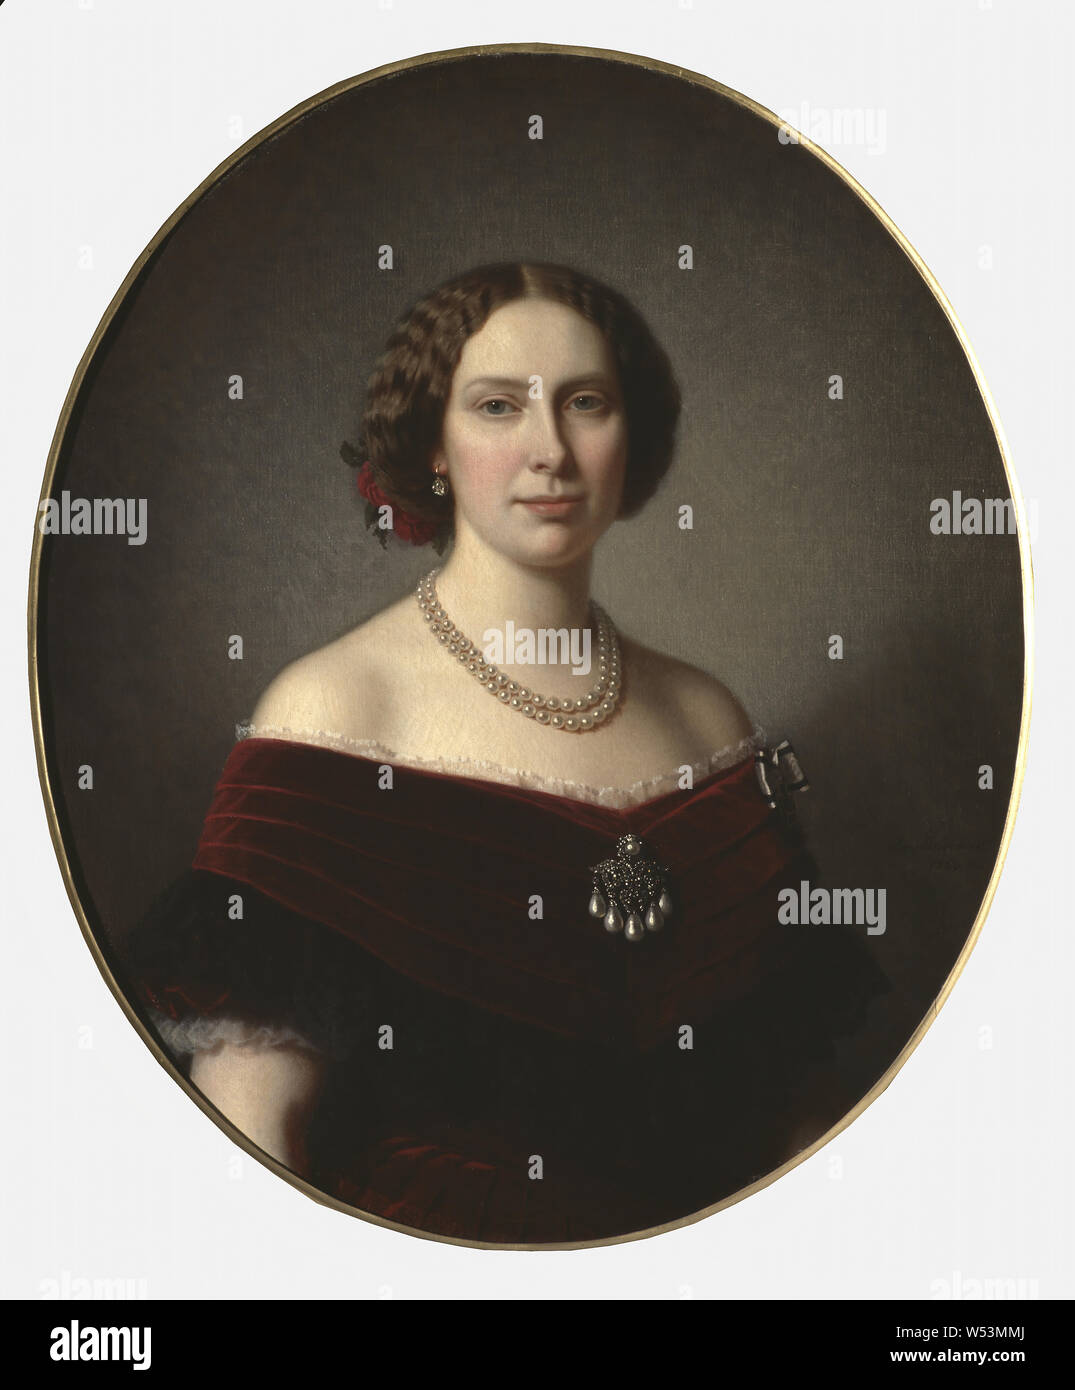 Amalia Lindegren, Queen Lovisa, Lovisa, 1828-1871, Queen of Sweden, painting, oil on canvas, Height, 85 cm (33.4 inches), Width, 73 cm (28.7 inches) Stock Photo